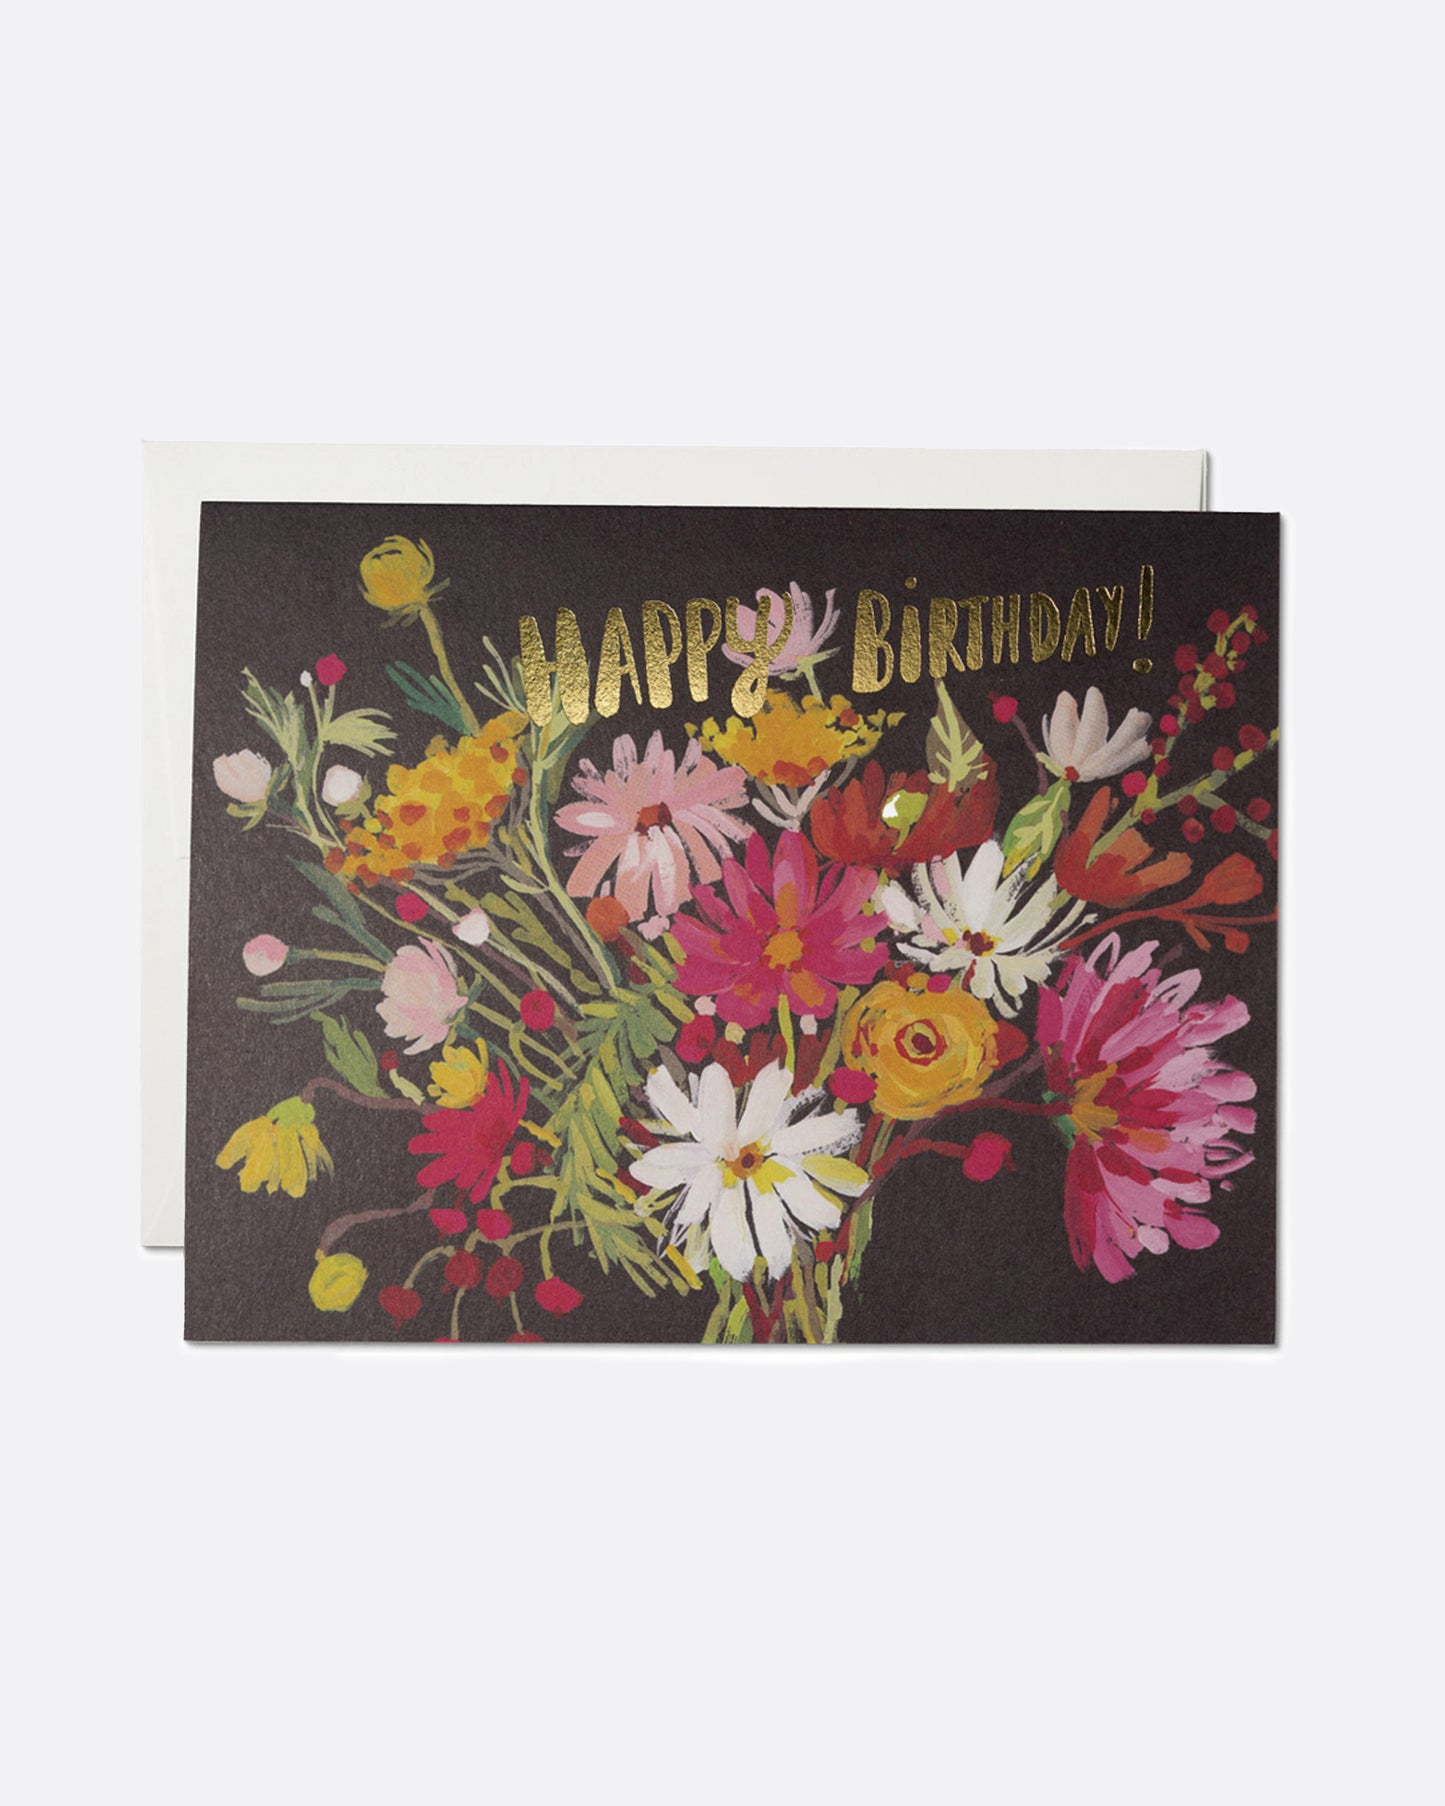 A painterly, foiled card to wish someone a happy birthday with a big bouquet of flowers.